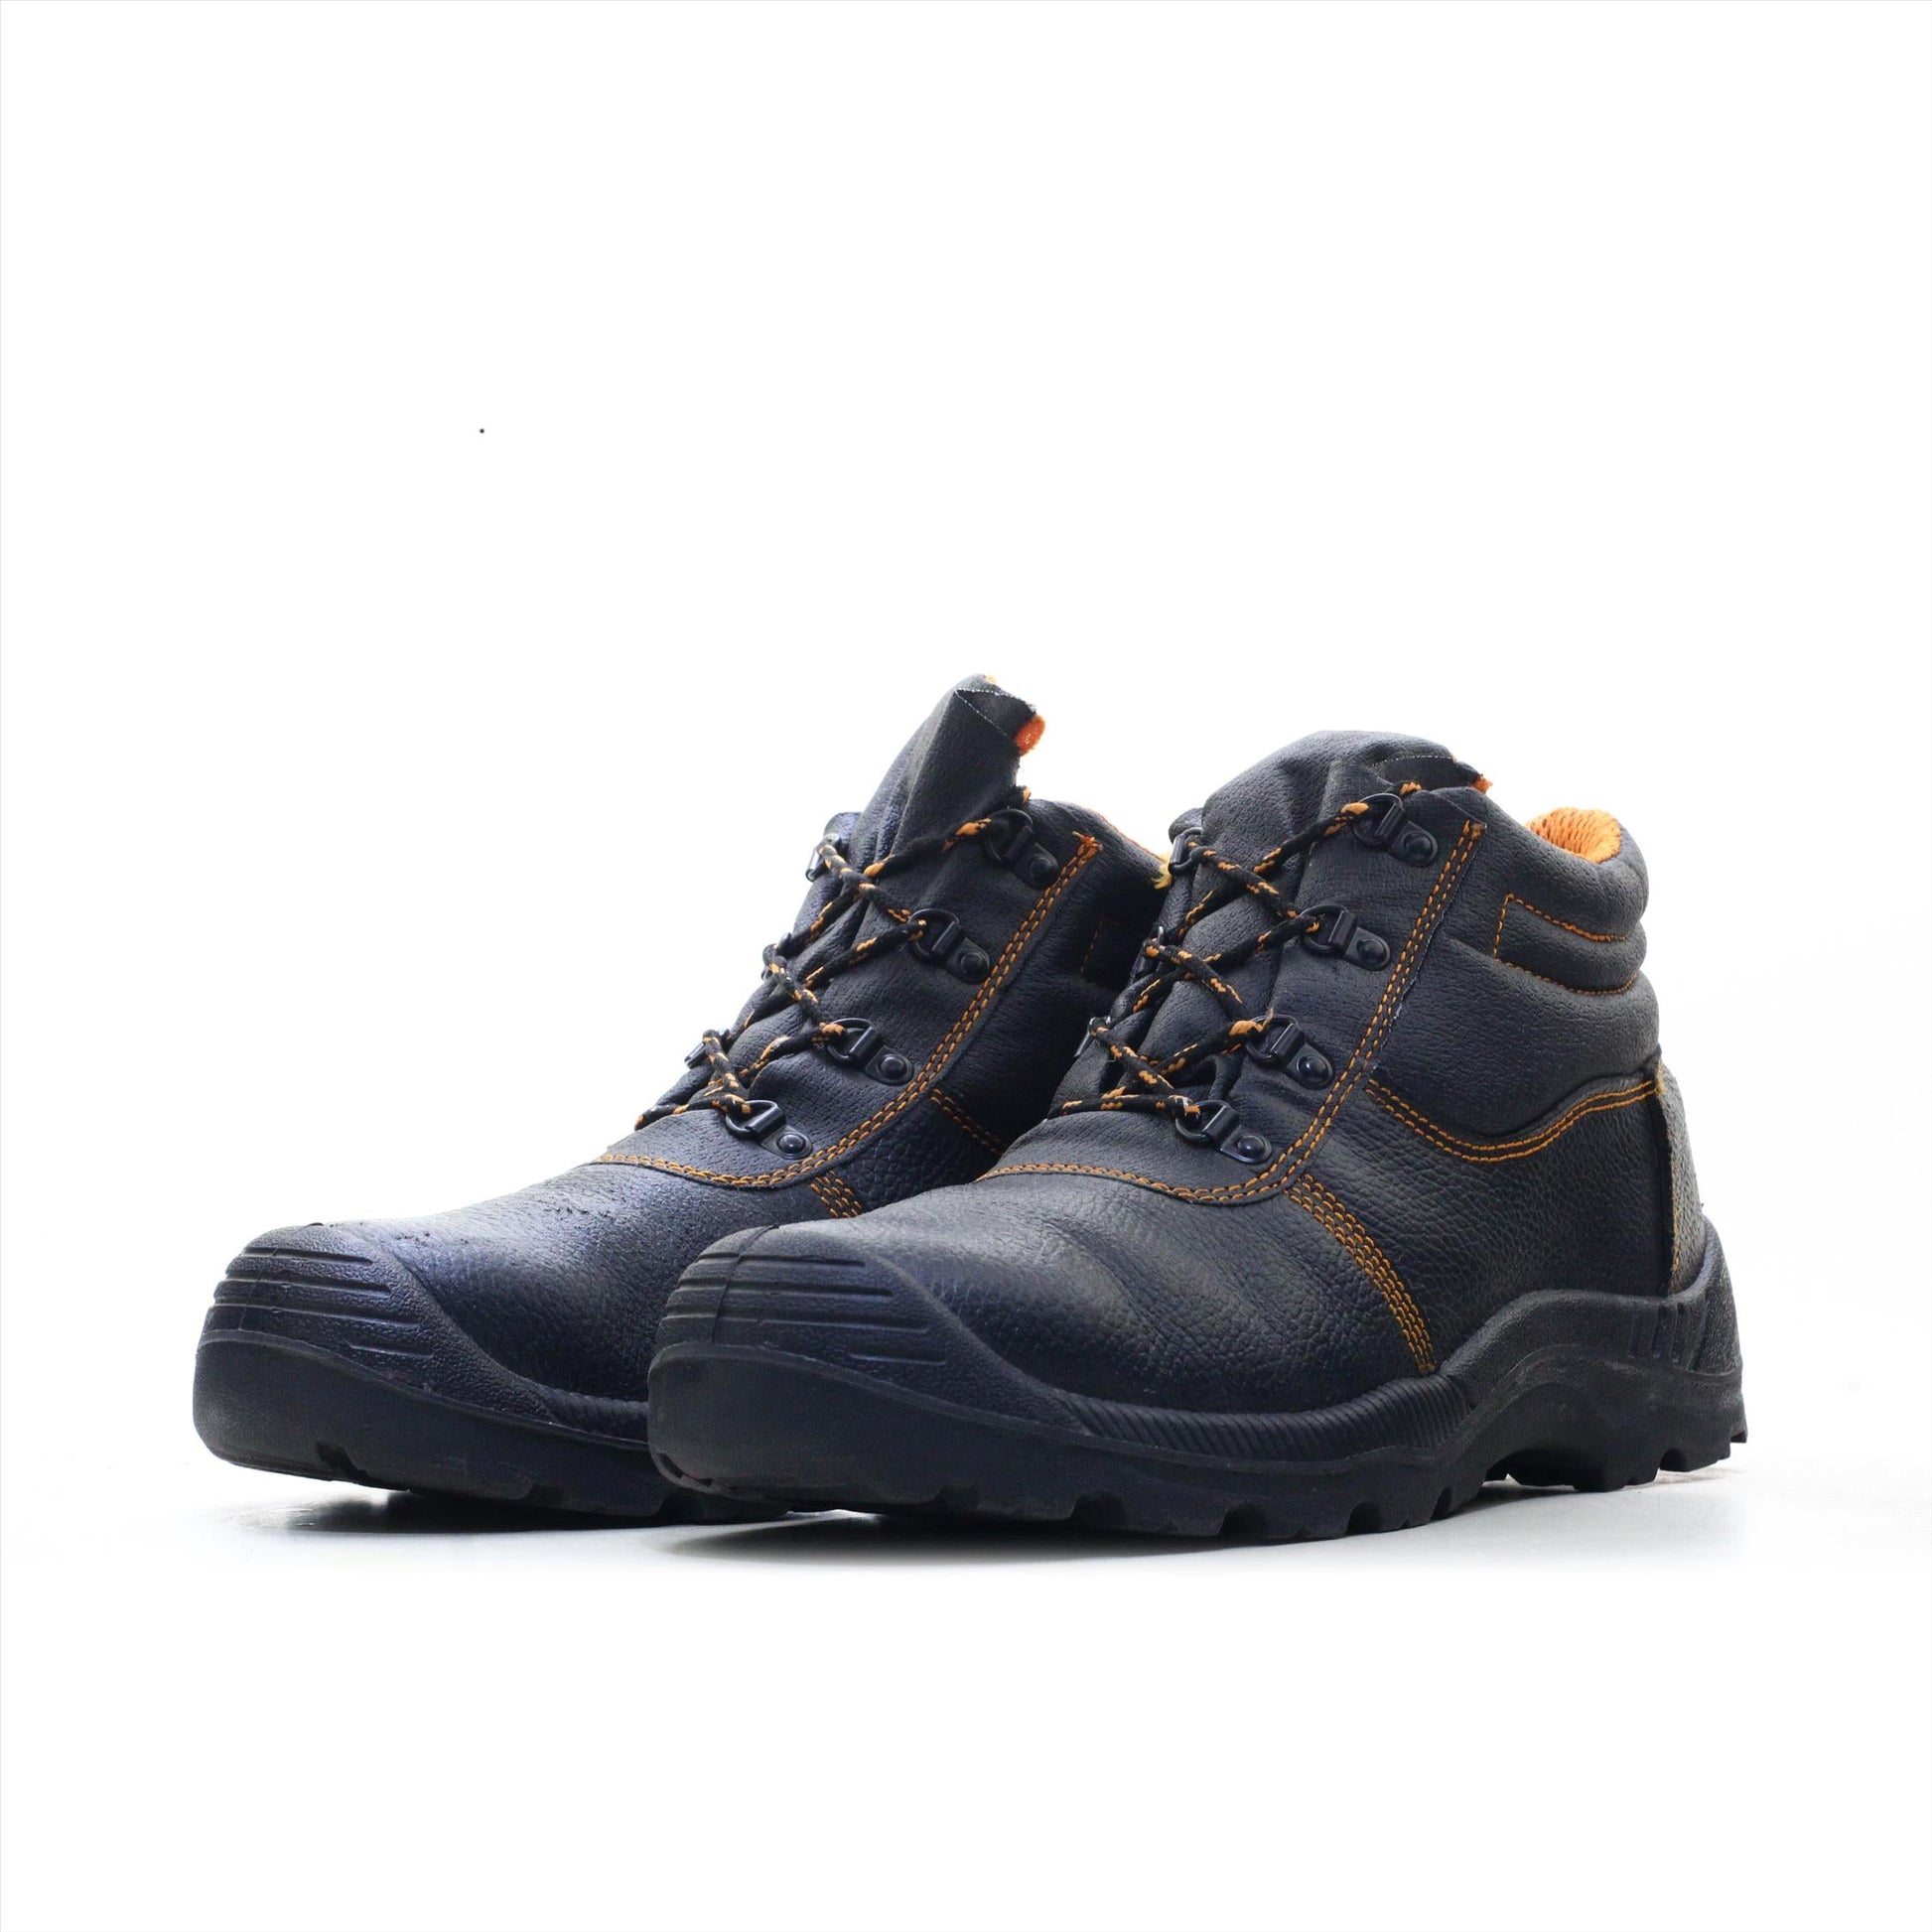 PENGO'LINE STEEL TOE SAFETY BOOTS (Original USA Imported)